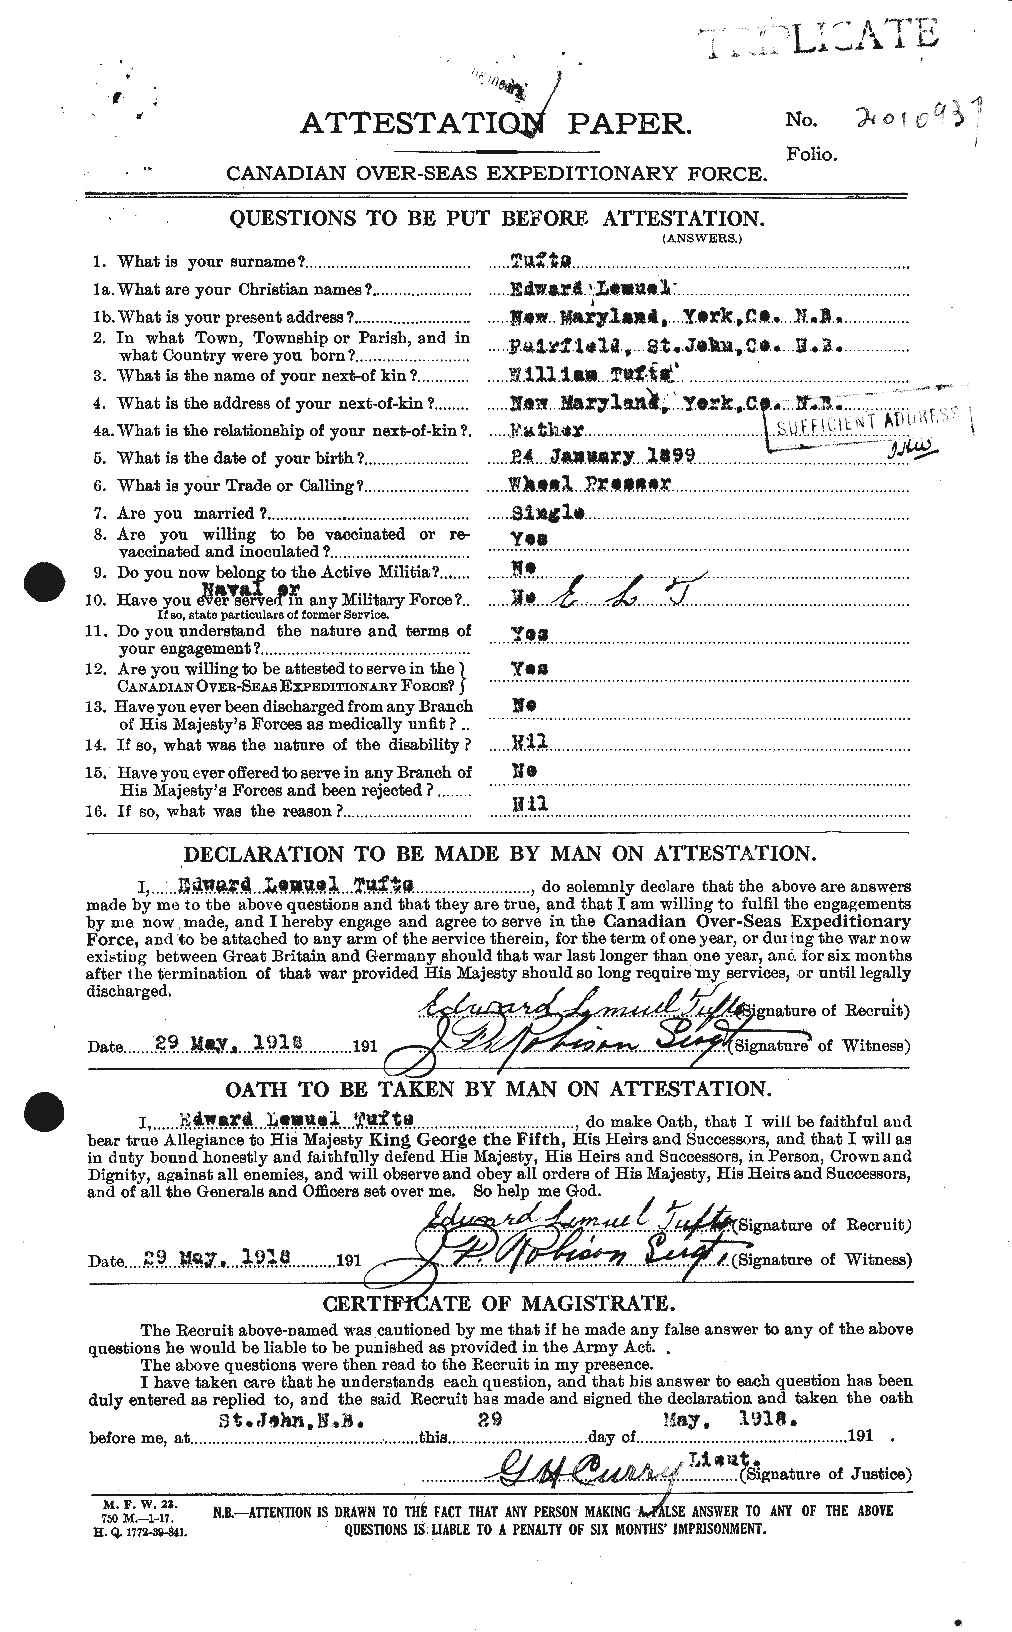 Personnel Records of the First World War - CEF 644238a